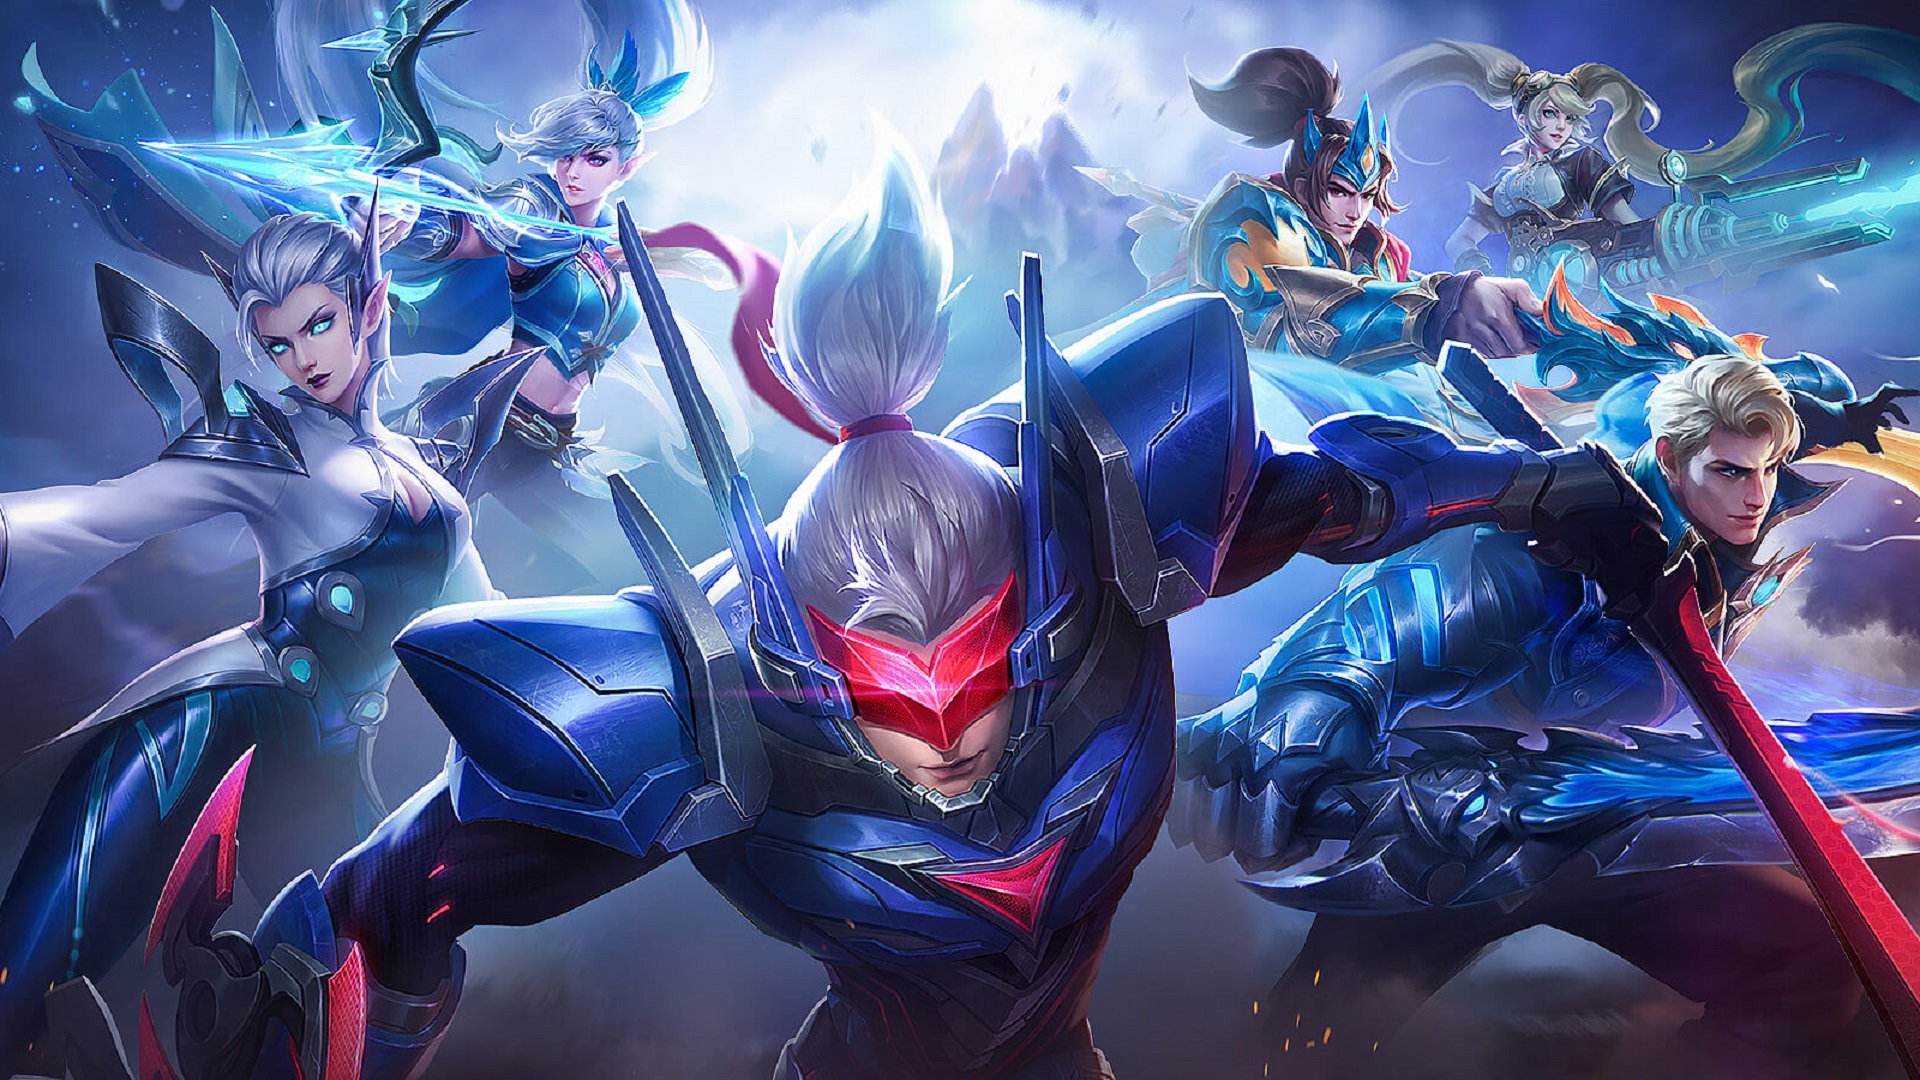  An illustration of five characters from the game Mobile Legends, with the text "Mobile Legends" and "6GB RAM" superimposed.